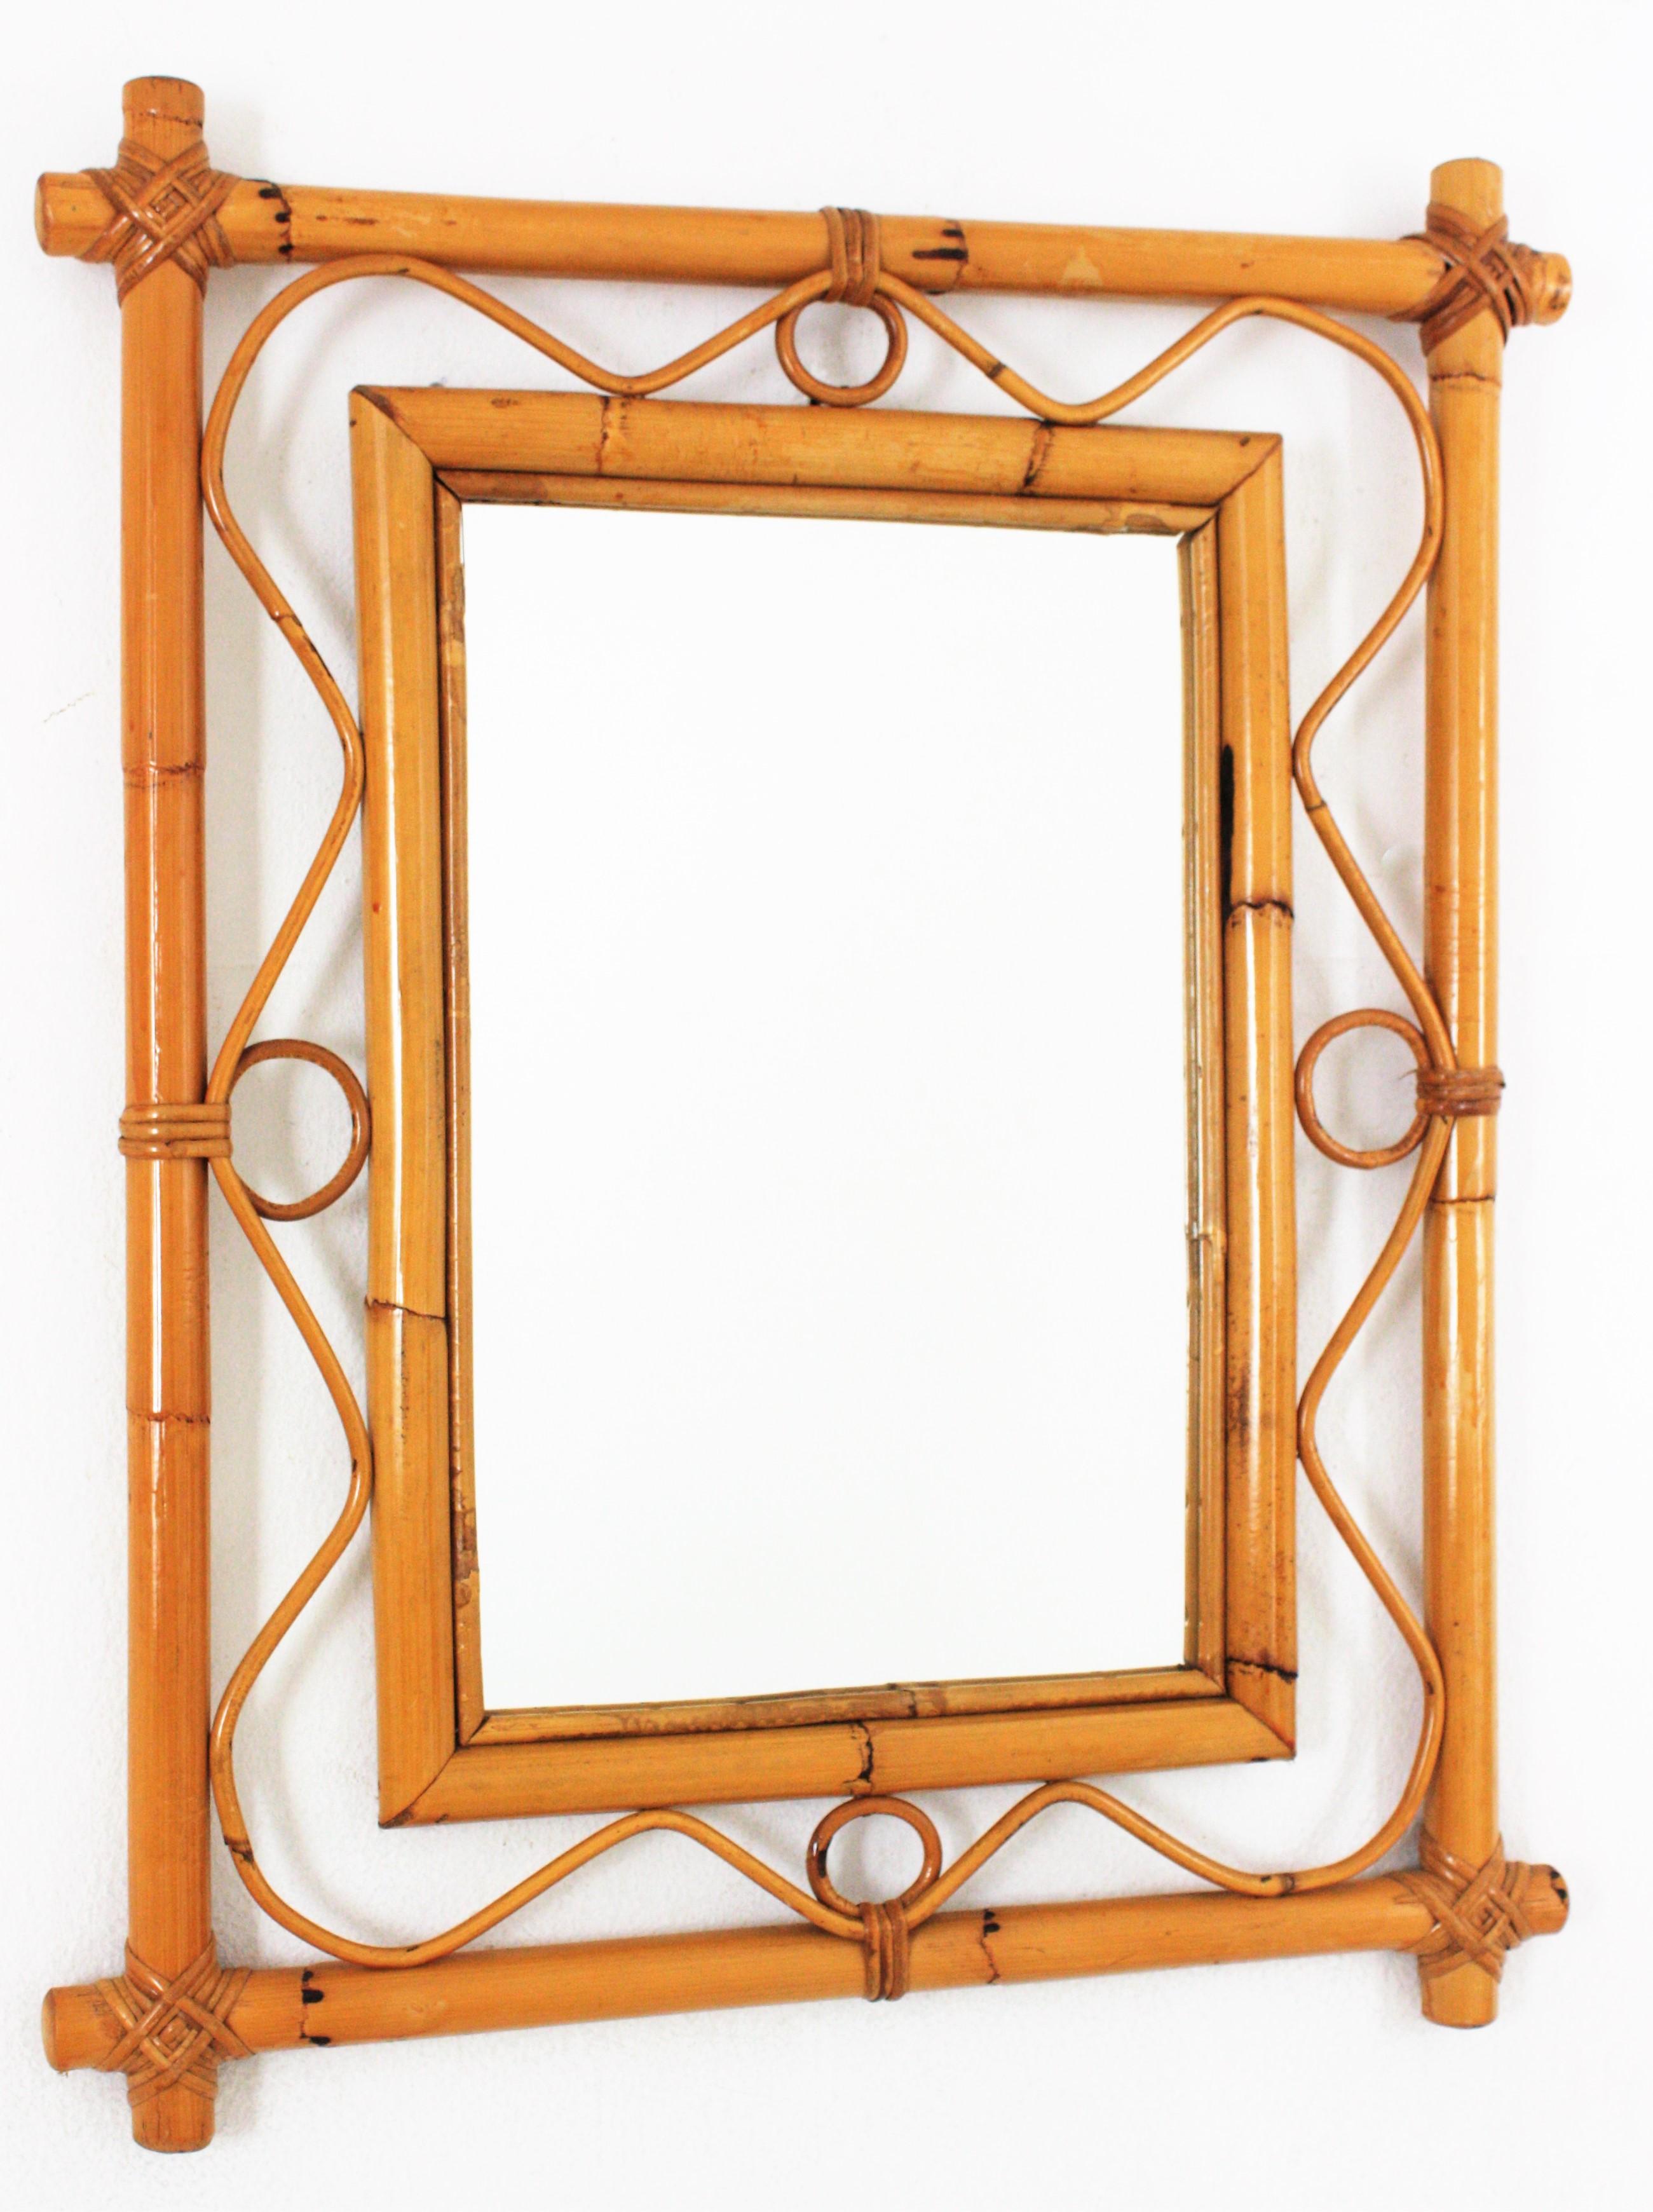 Midcentury rectangular mirror, Rattan & Bamboo
Eye-catching Mid-Century Modern Franco Albini style handcrafted bamboo rattan mirror. Italy, 1960s.
This mirror features a double bamboo rectangular frame with wavy rattan decorations between the